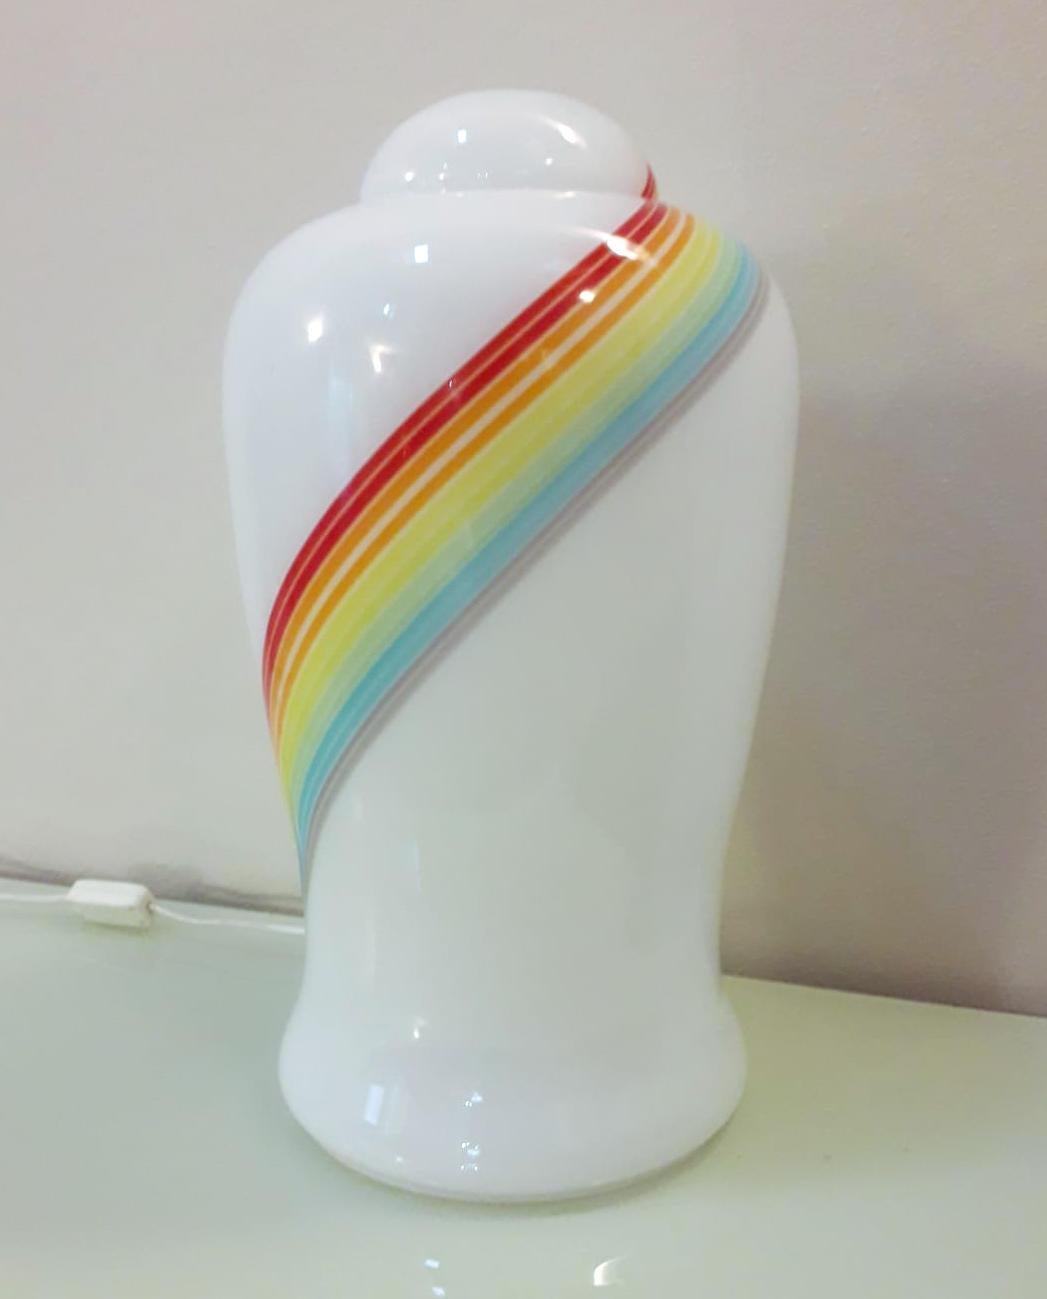 Vintage Italian Murano glass table lamp with frosted white body and a swirl stripe in the colors of rainbow / Made in Italy circa 1960s
Original 